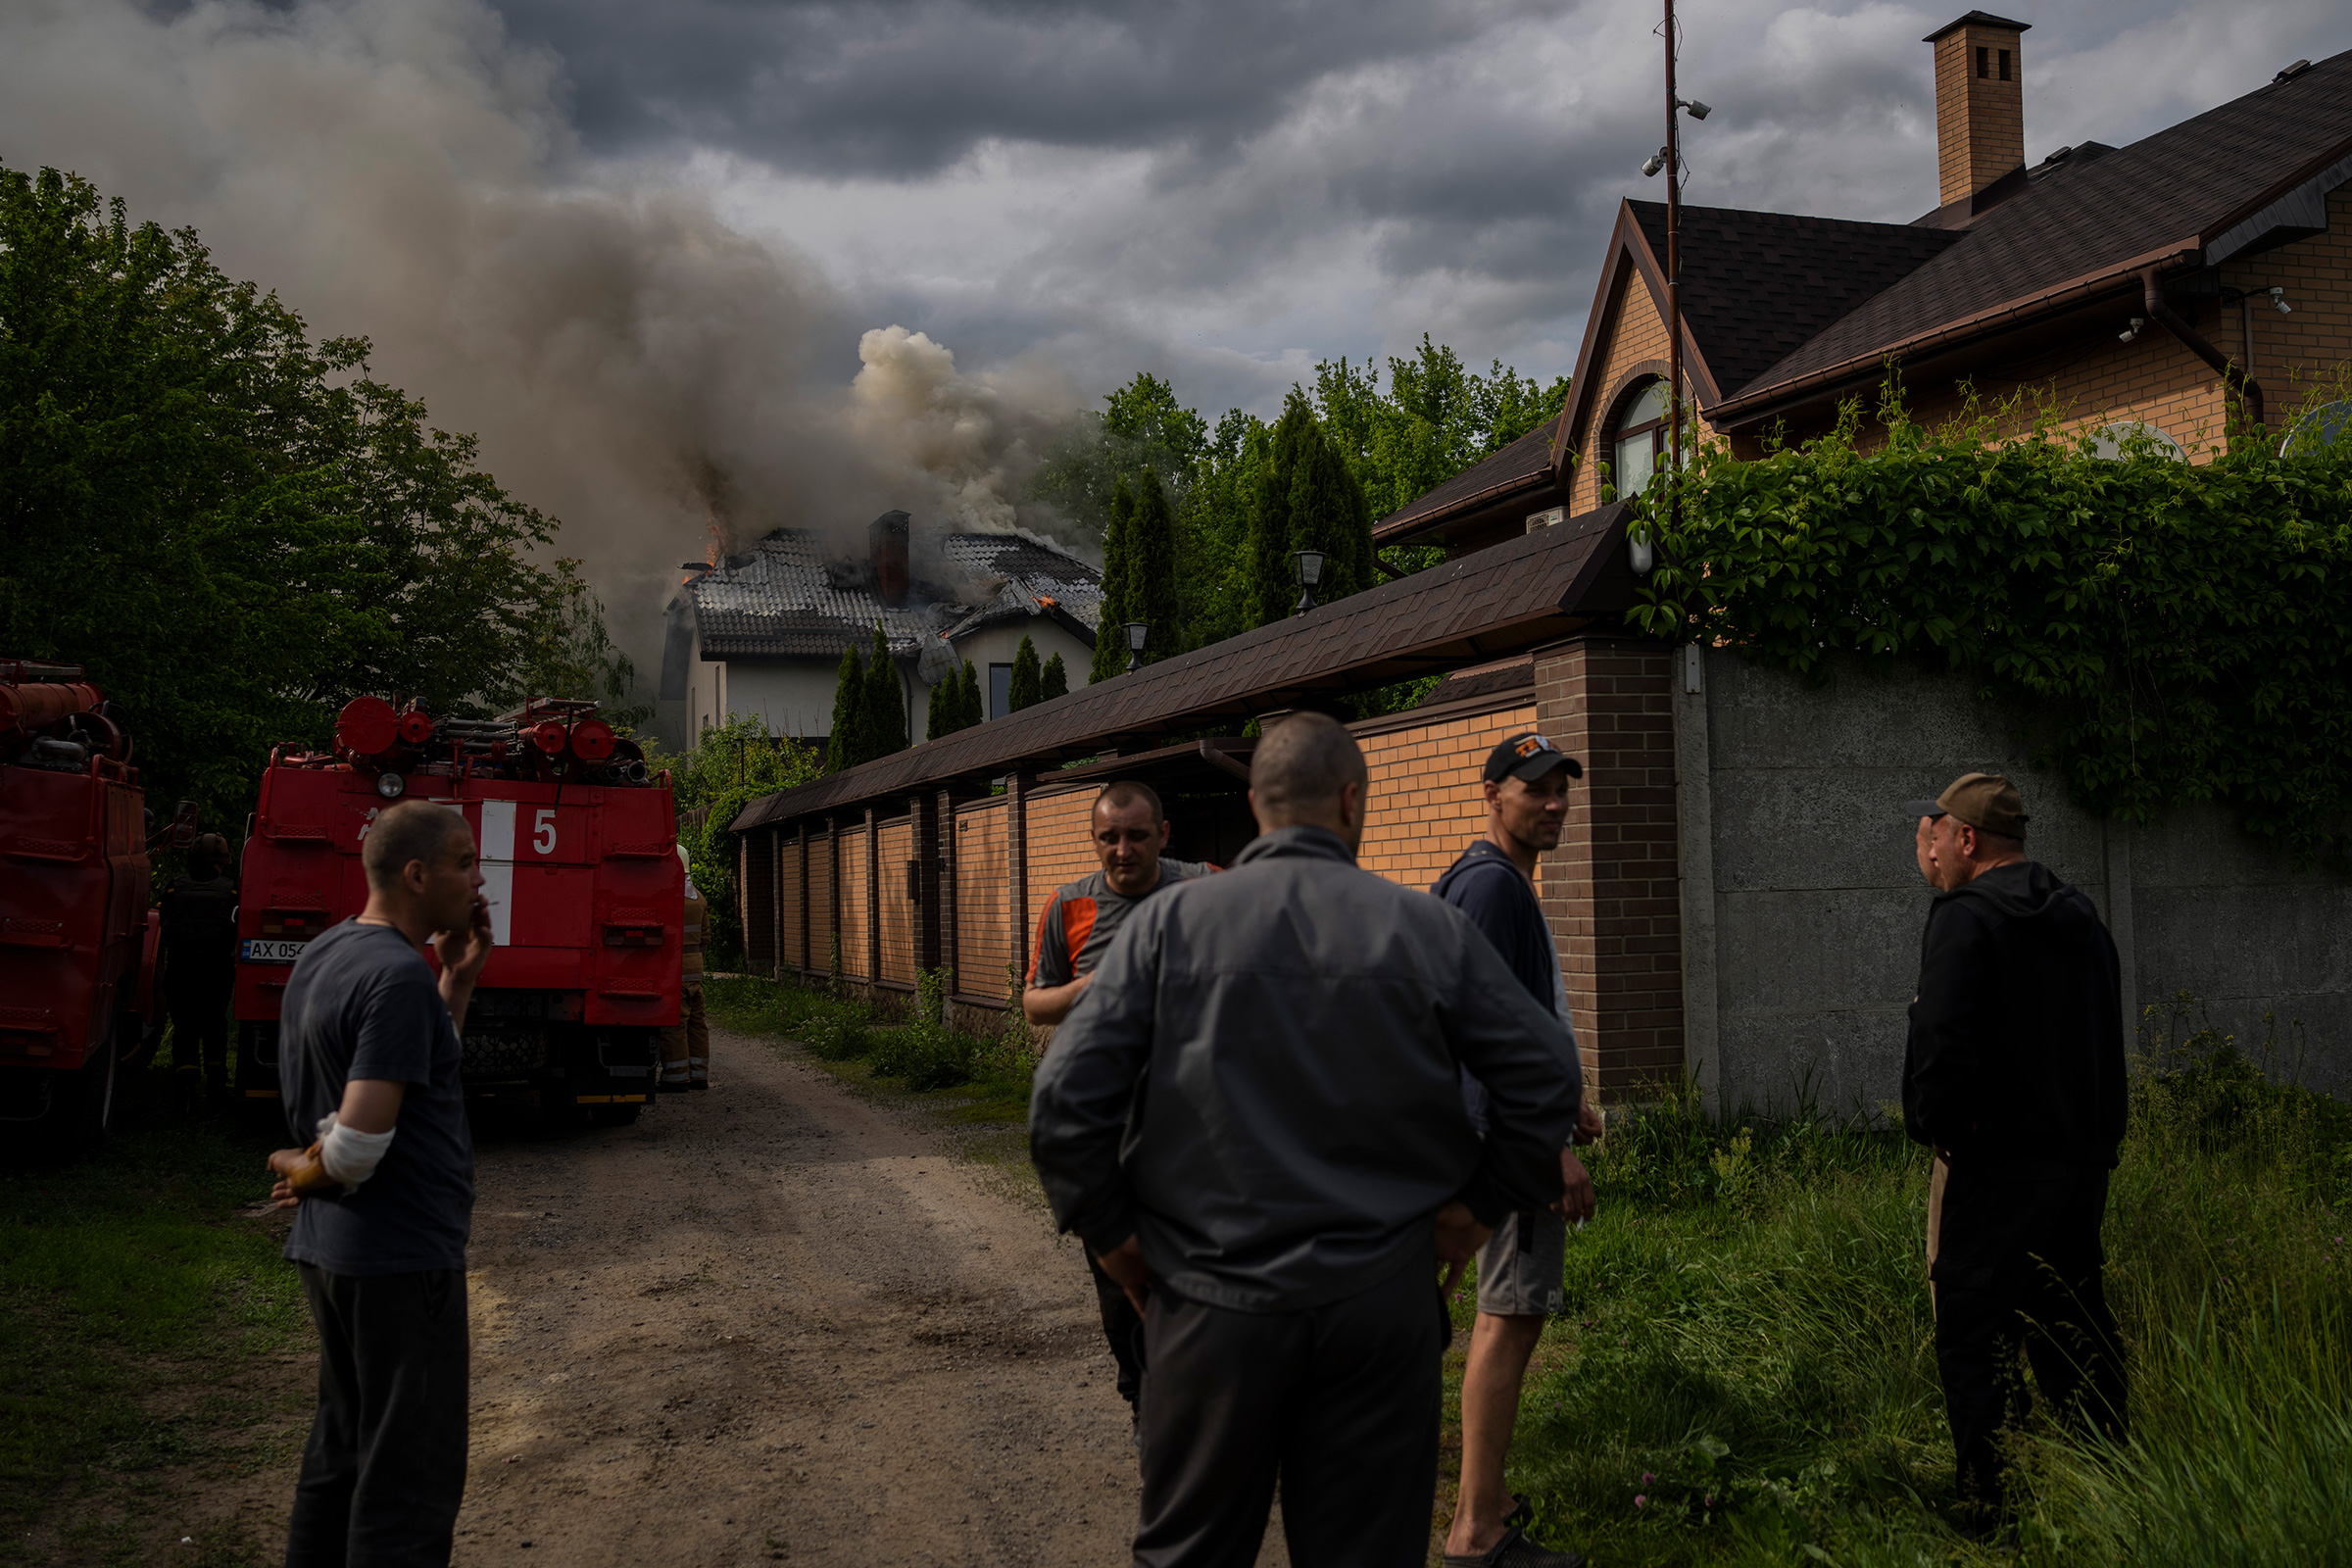 Neighbors gather around a house on fire that was hit during a Russian attack